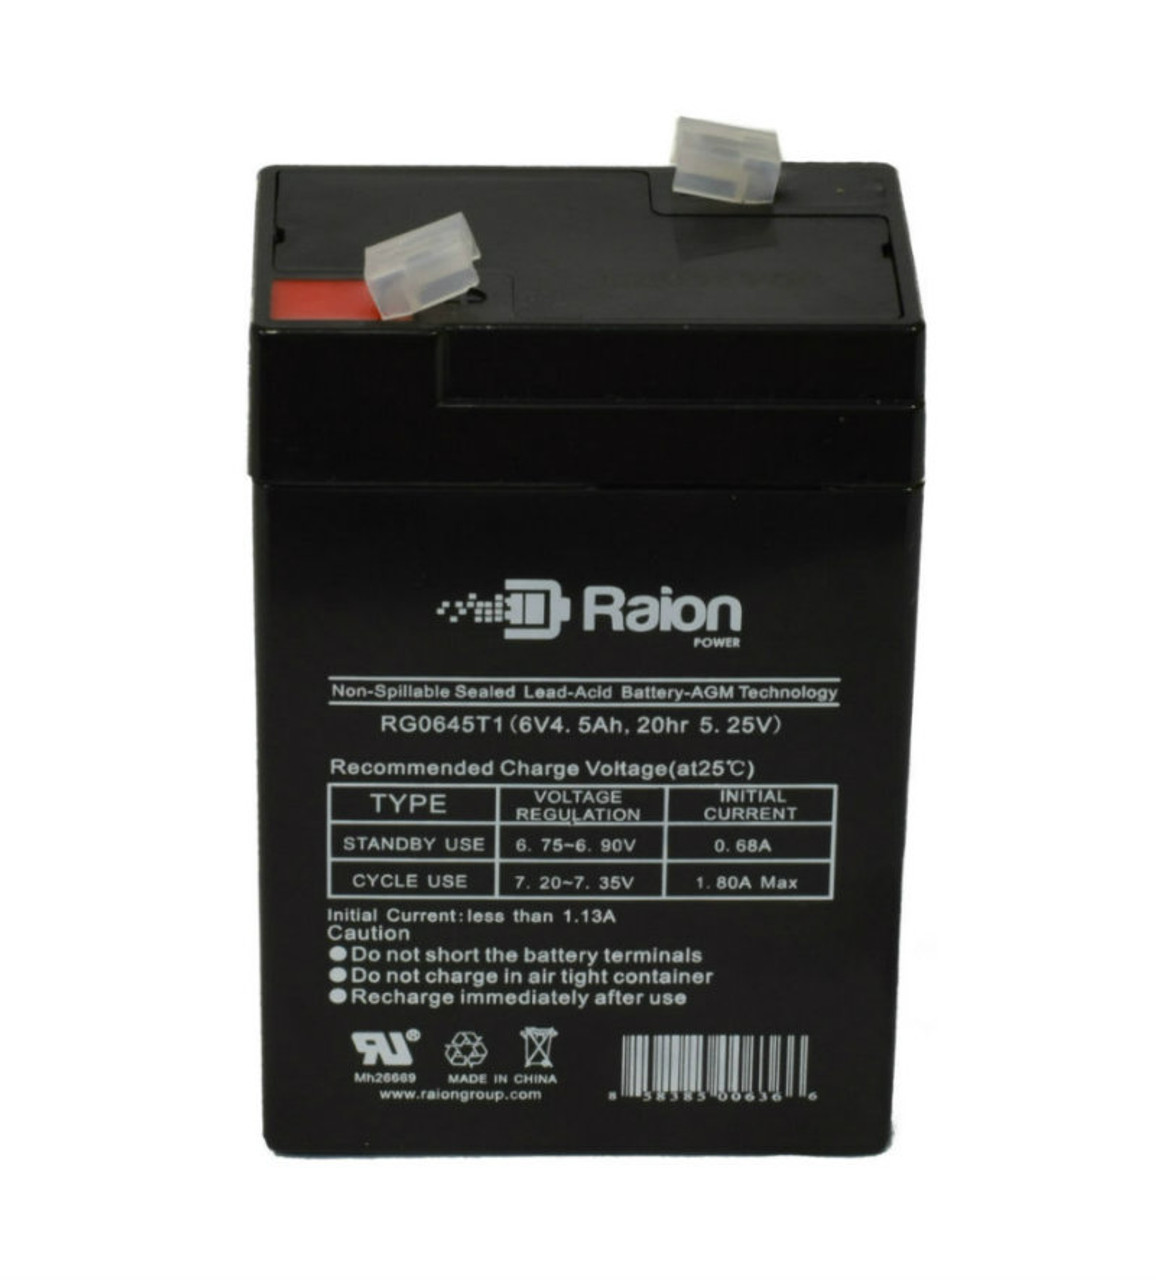 Raion Power RG0645T1 Replacement Battery Cartridge for Light Alarms XE8